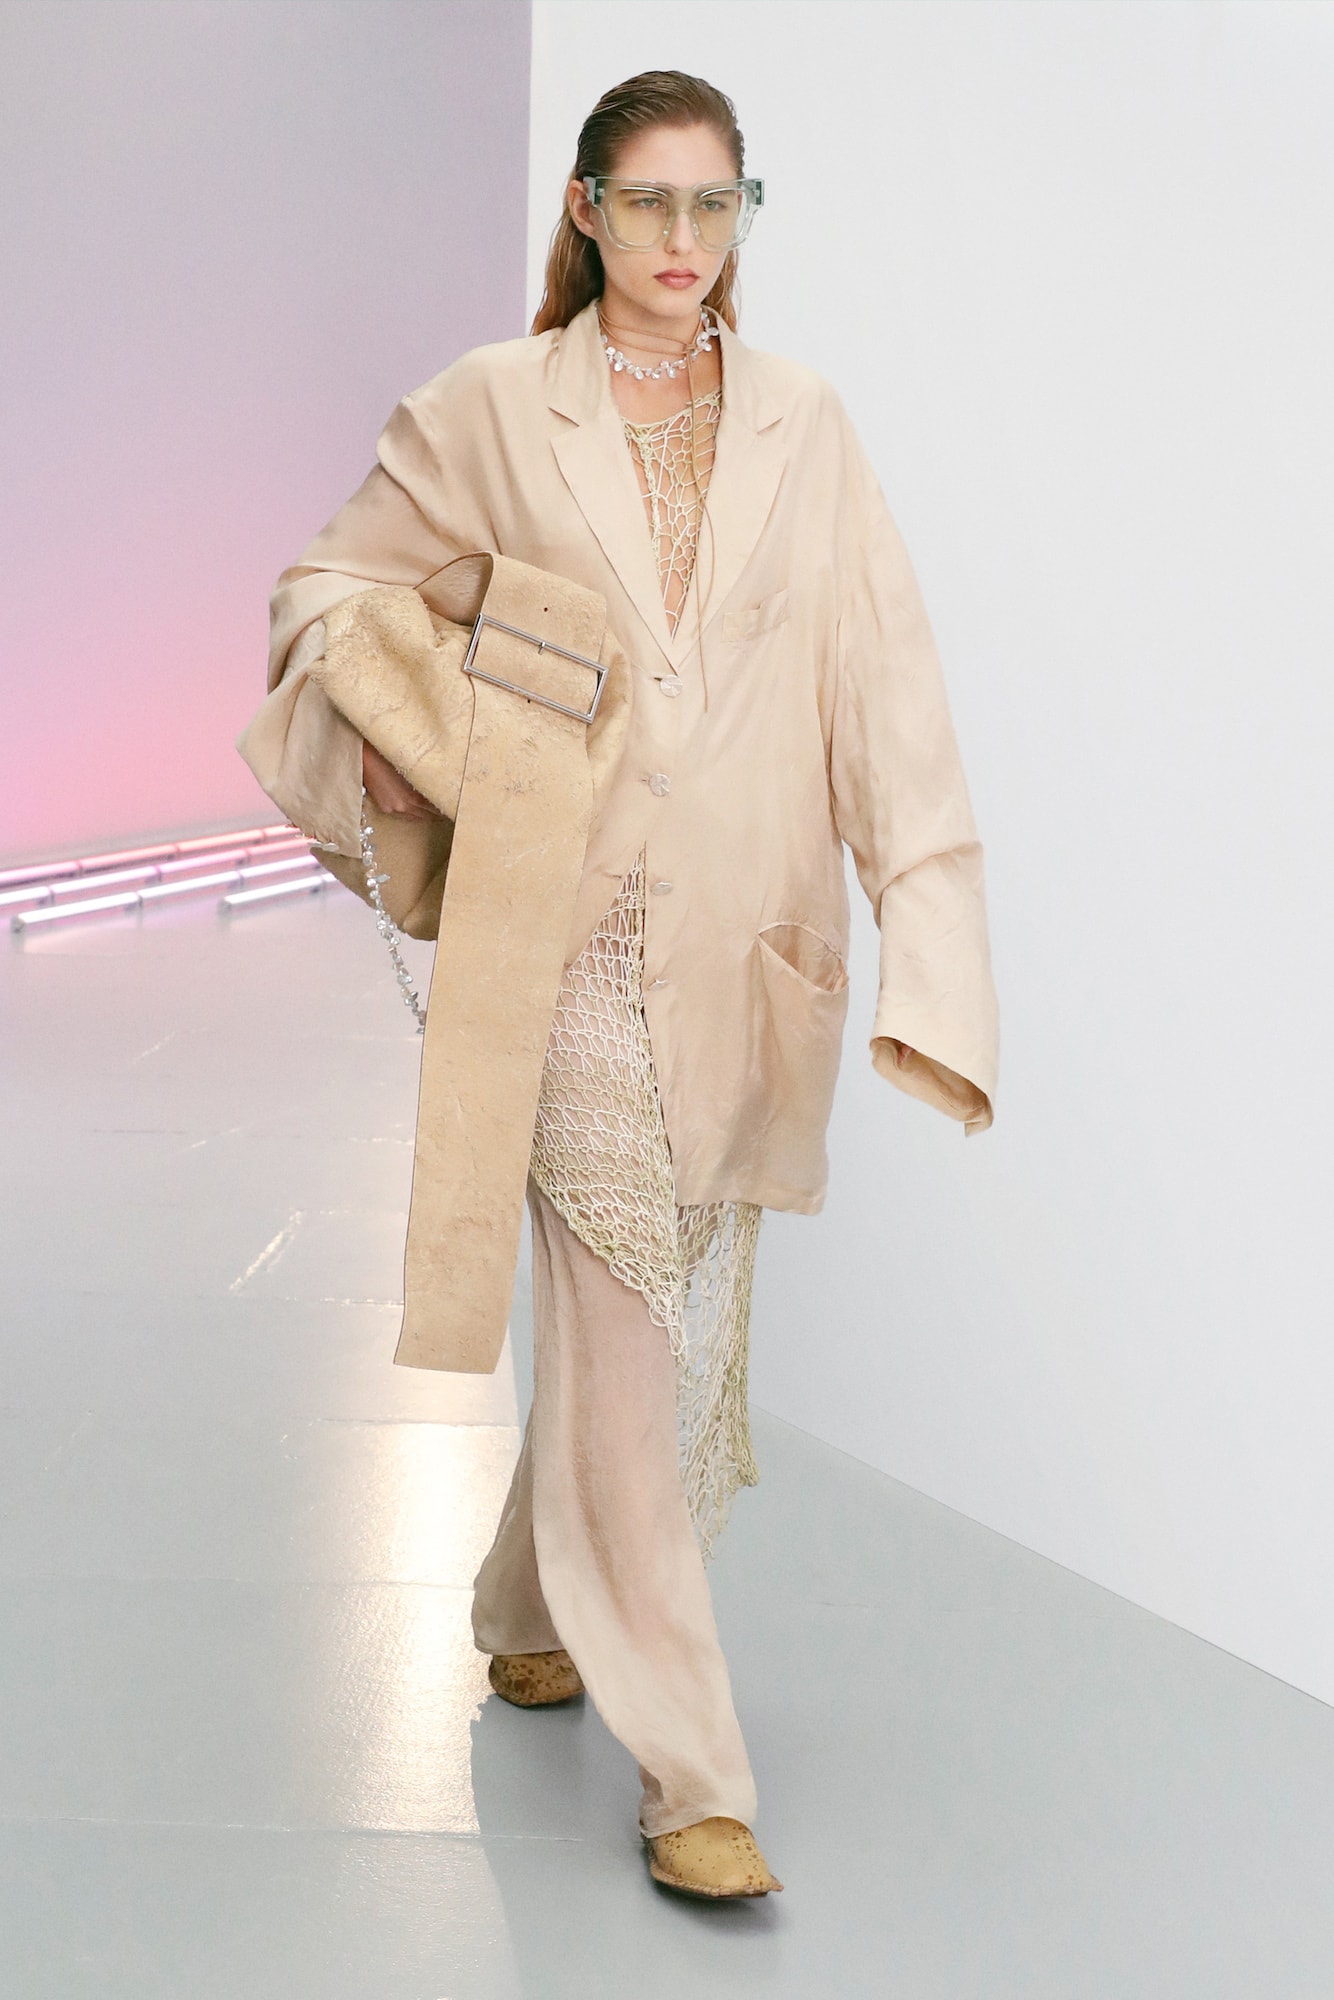 Acne Studios Spring/Summer 2021 Collection Show Paris Fashion Week Looks